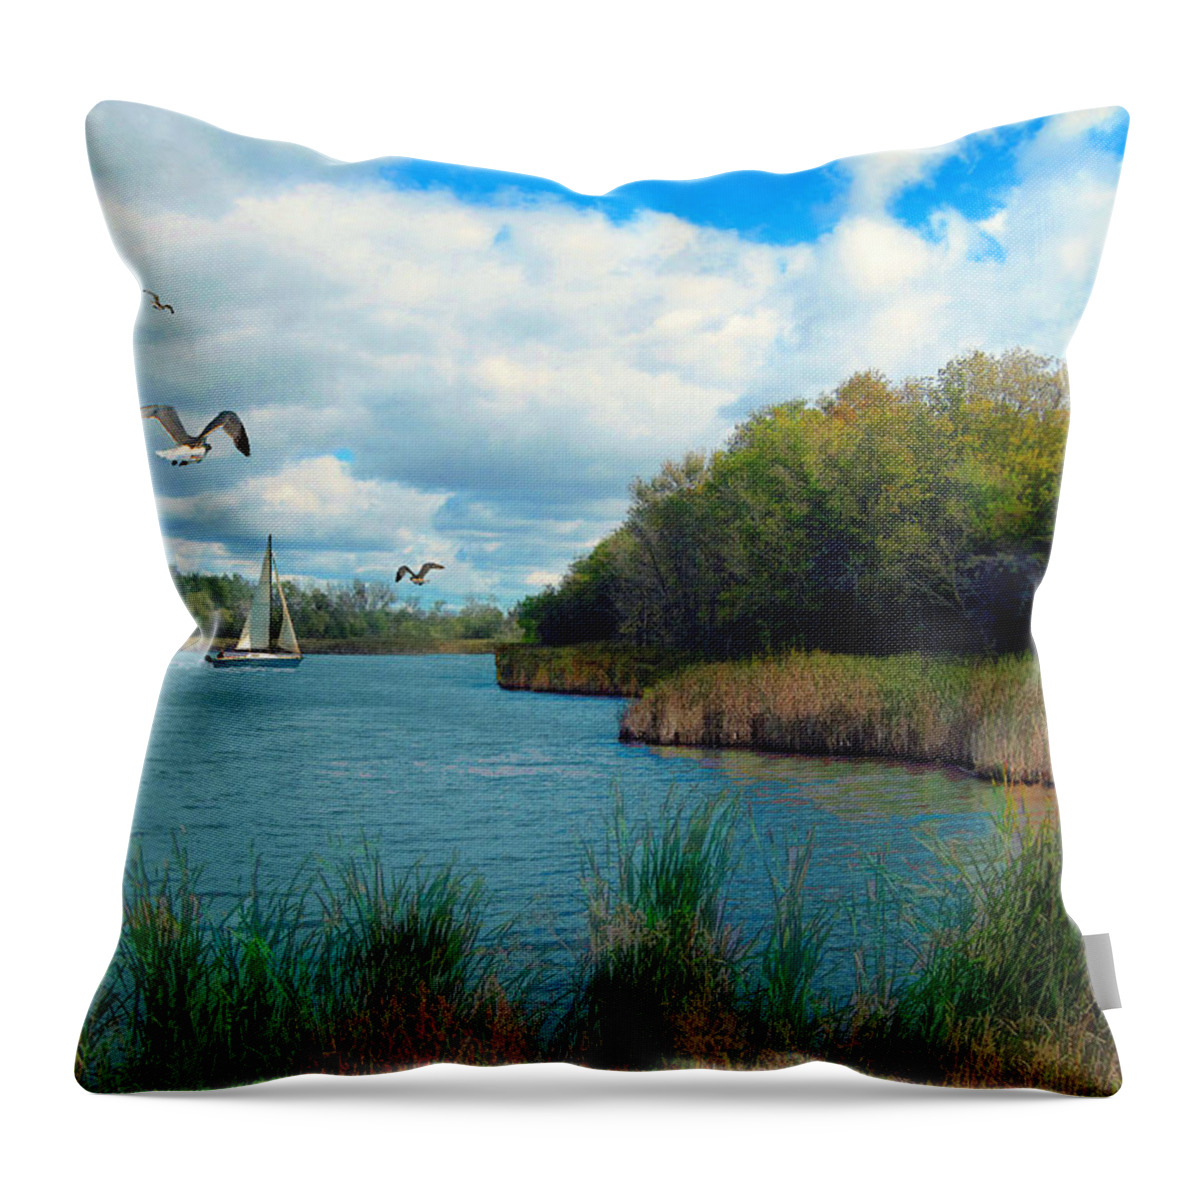 Cedric Hampton Throw Pillow featuring the photograph Sails In The Distance by Cedric Hampton